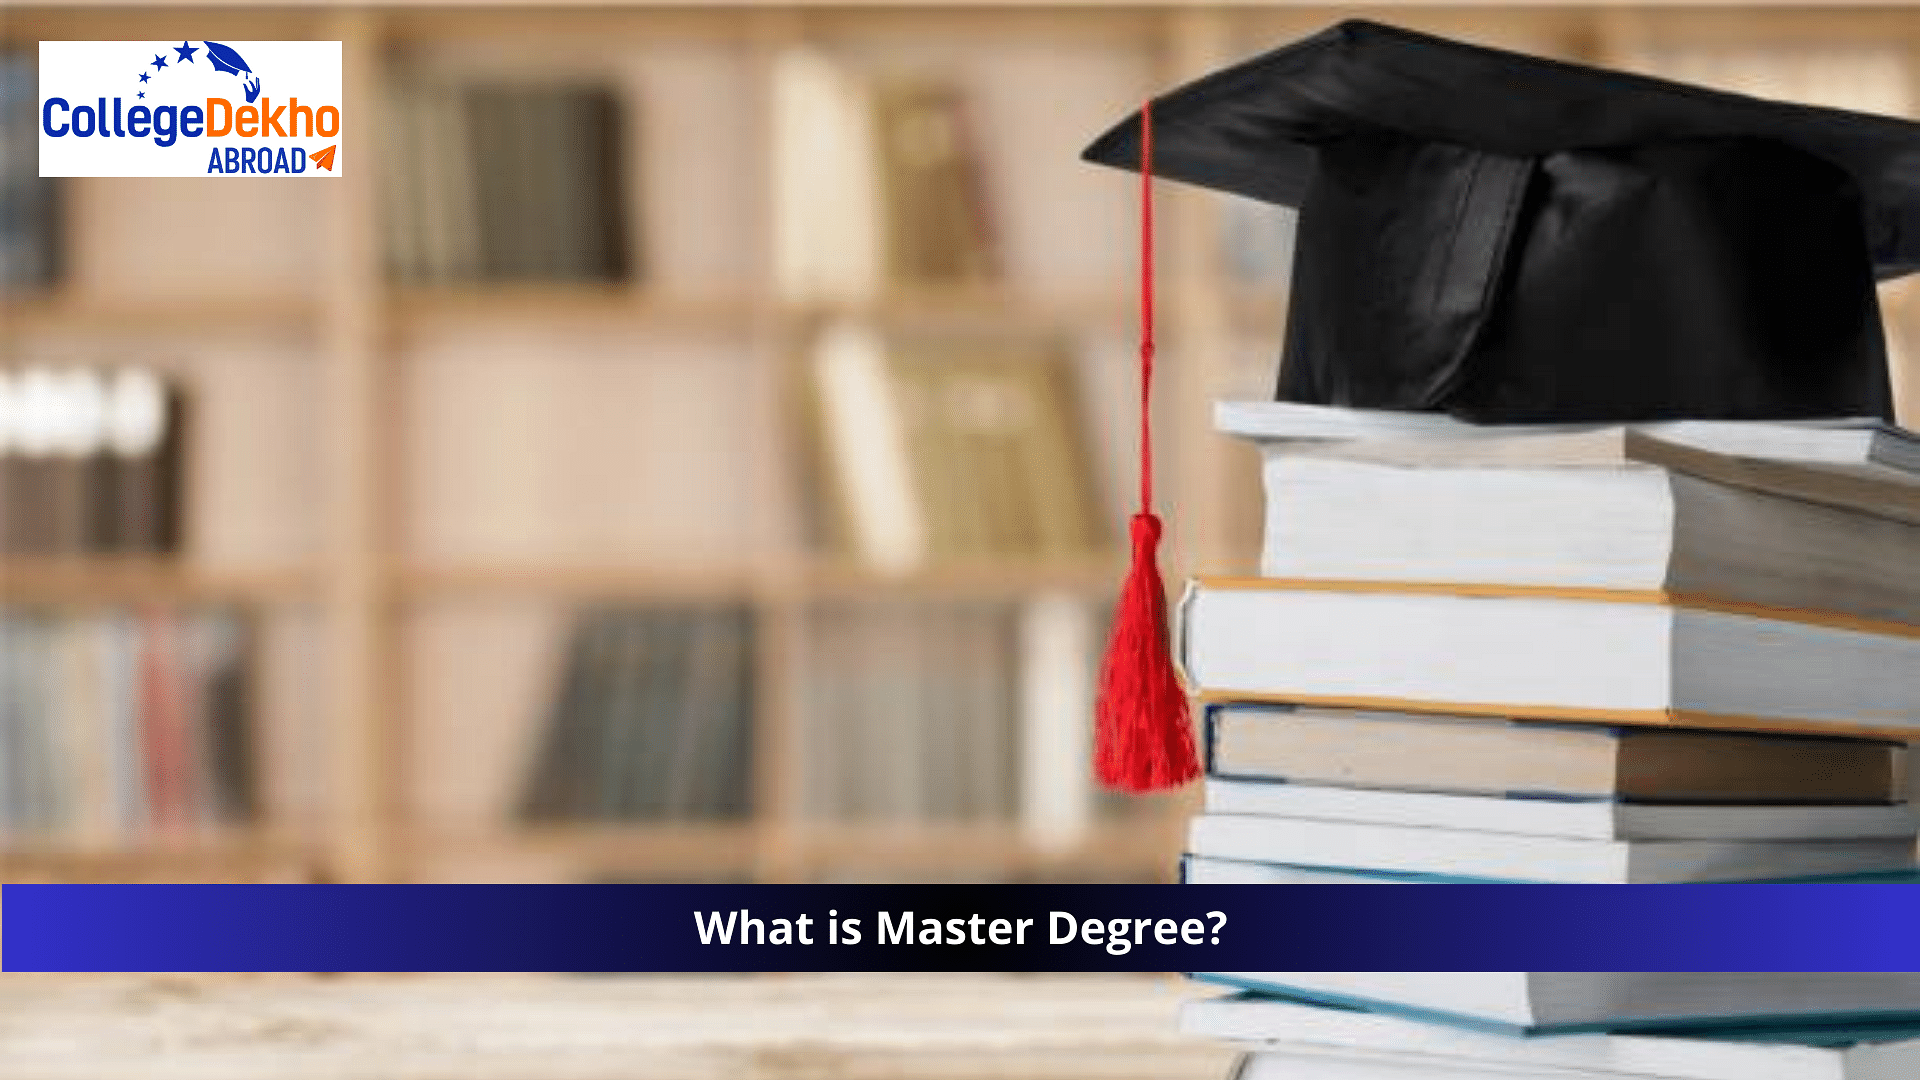 What is Master Degree?